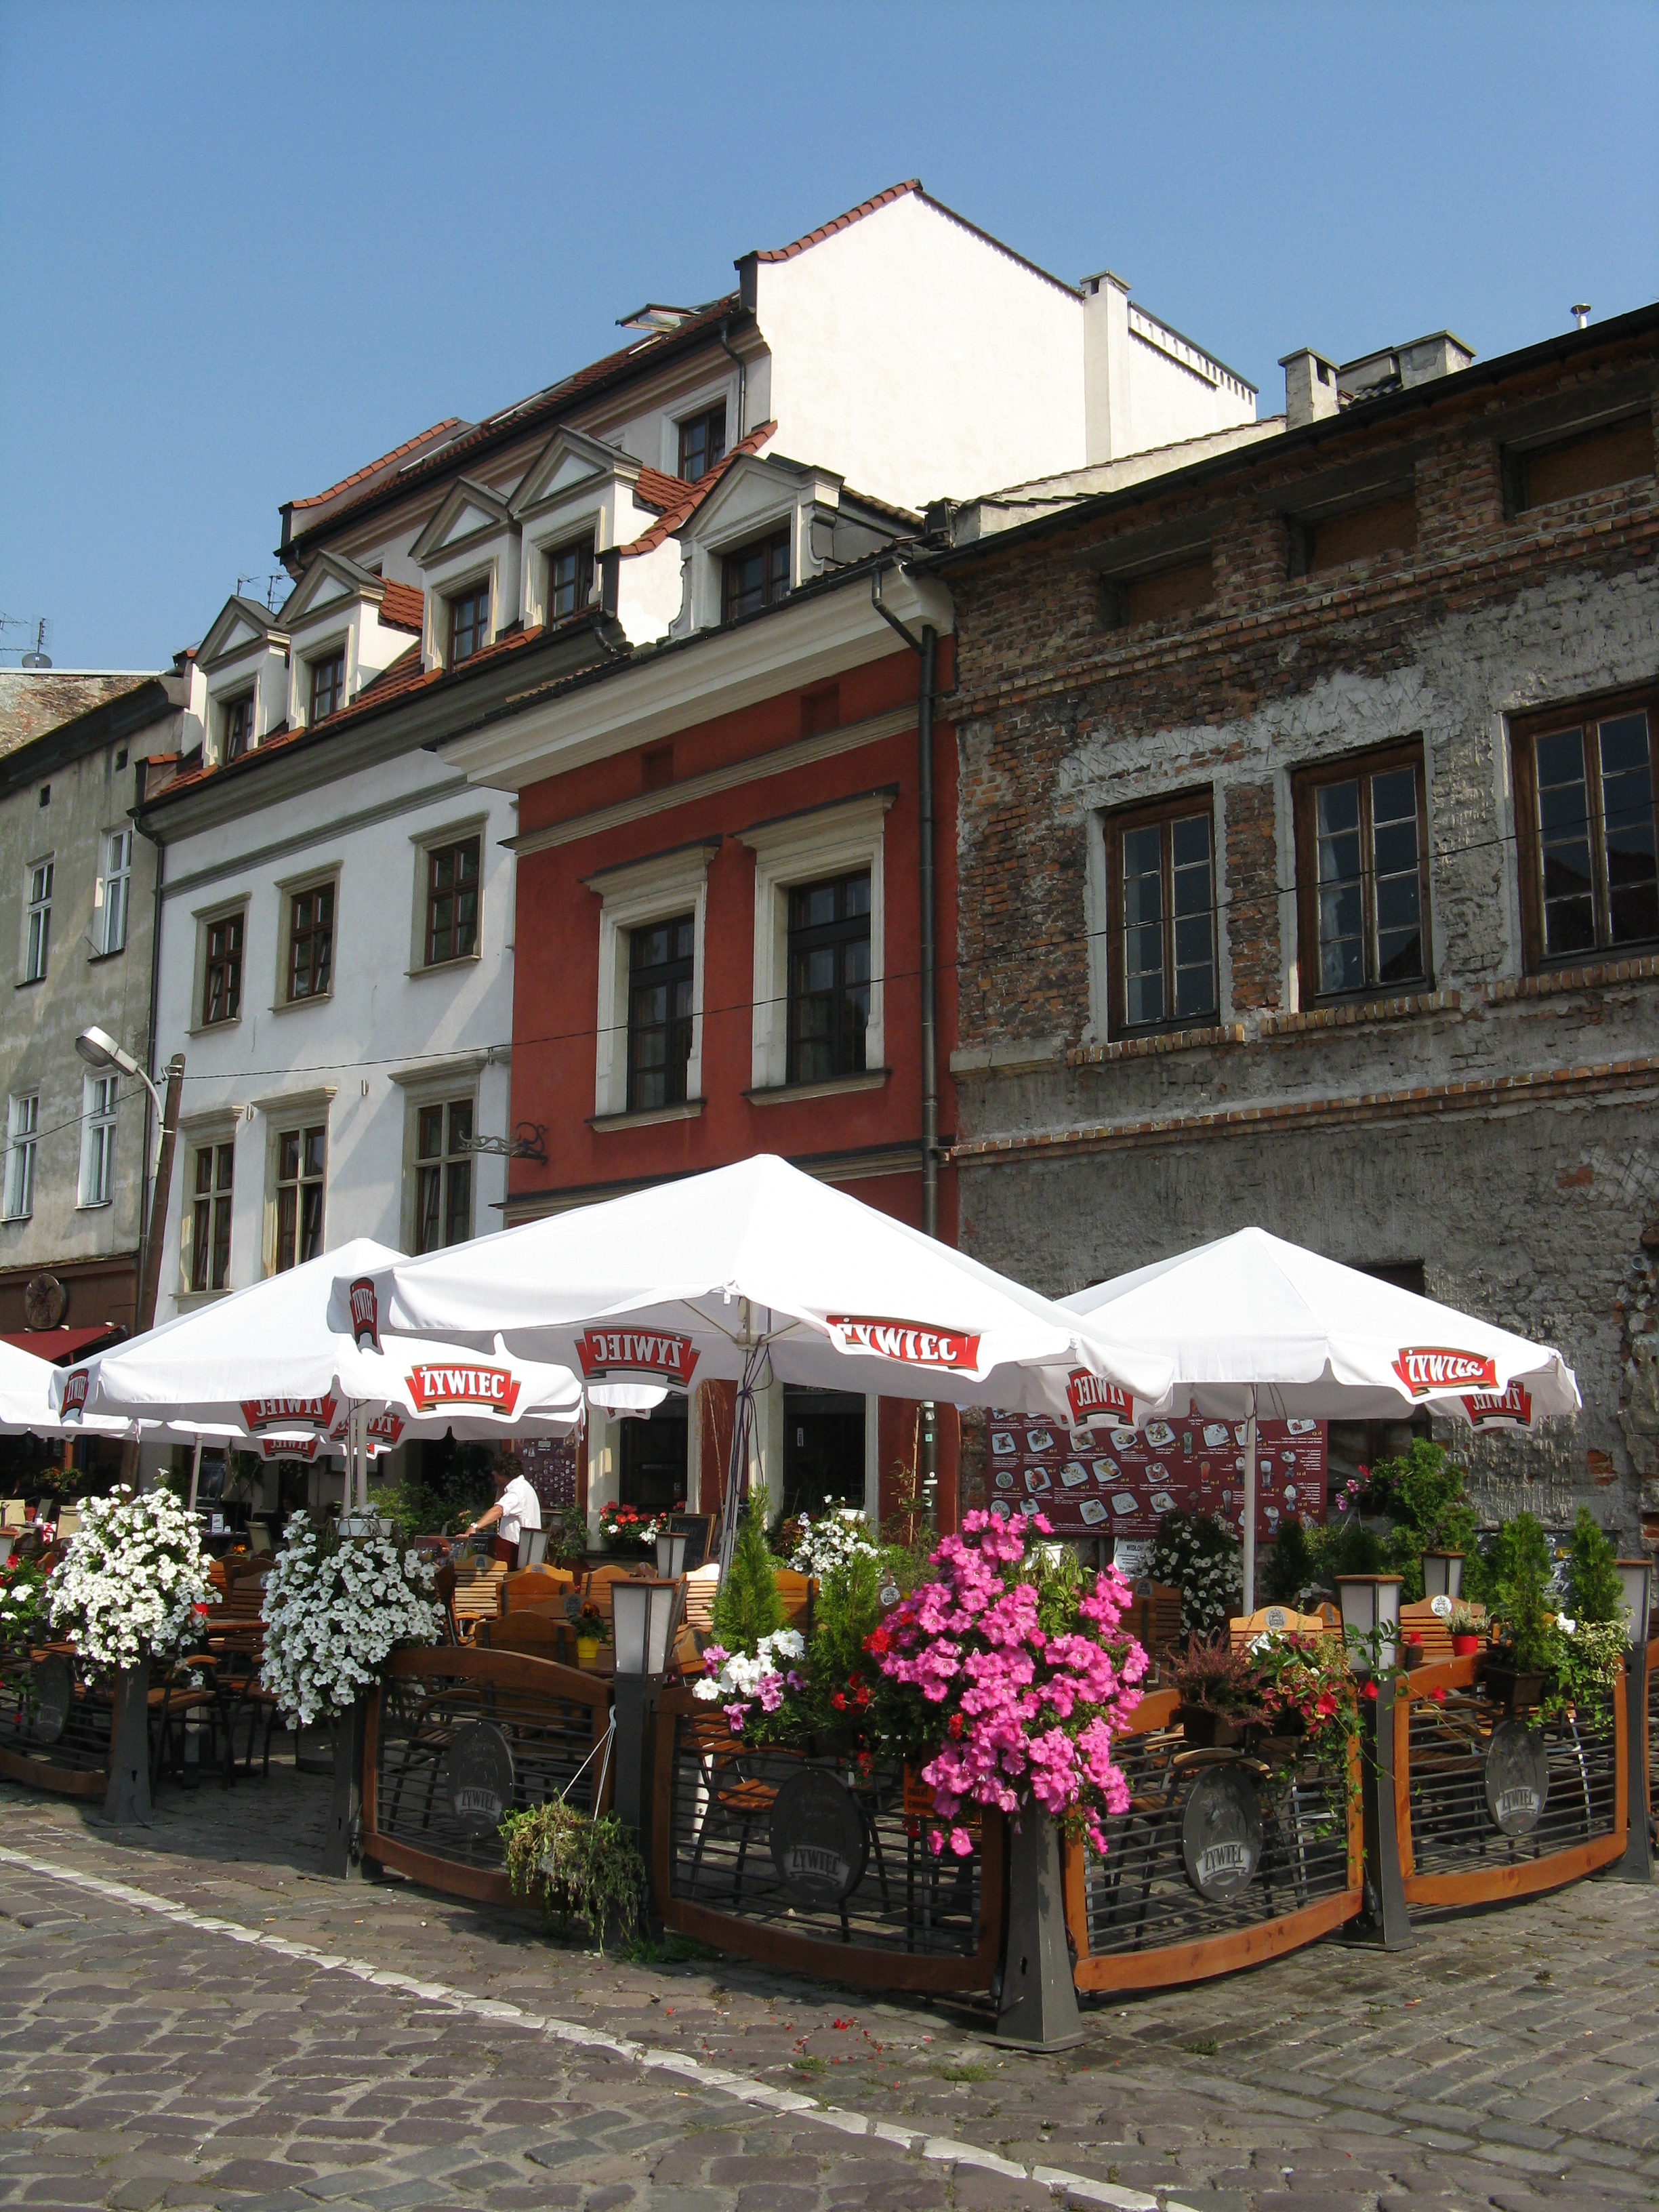 One of the cafes at the pretty square along Szeroka